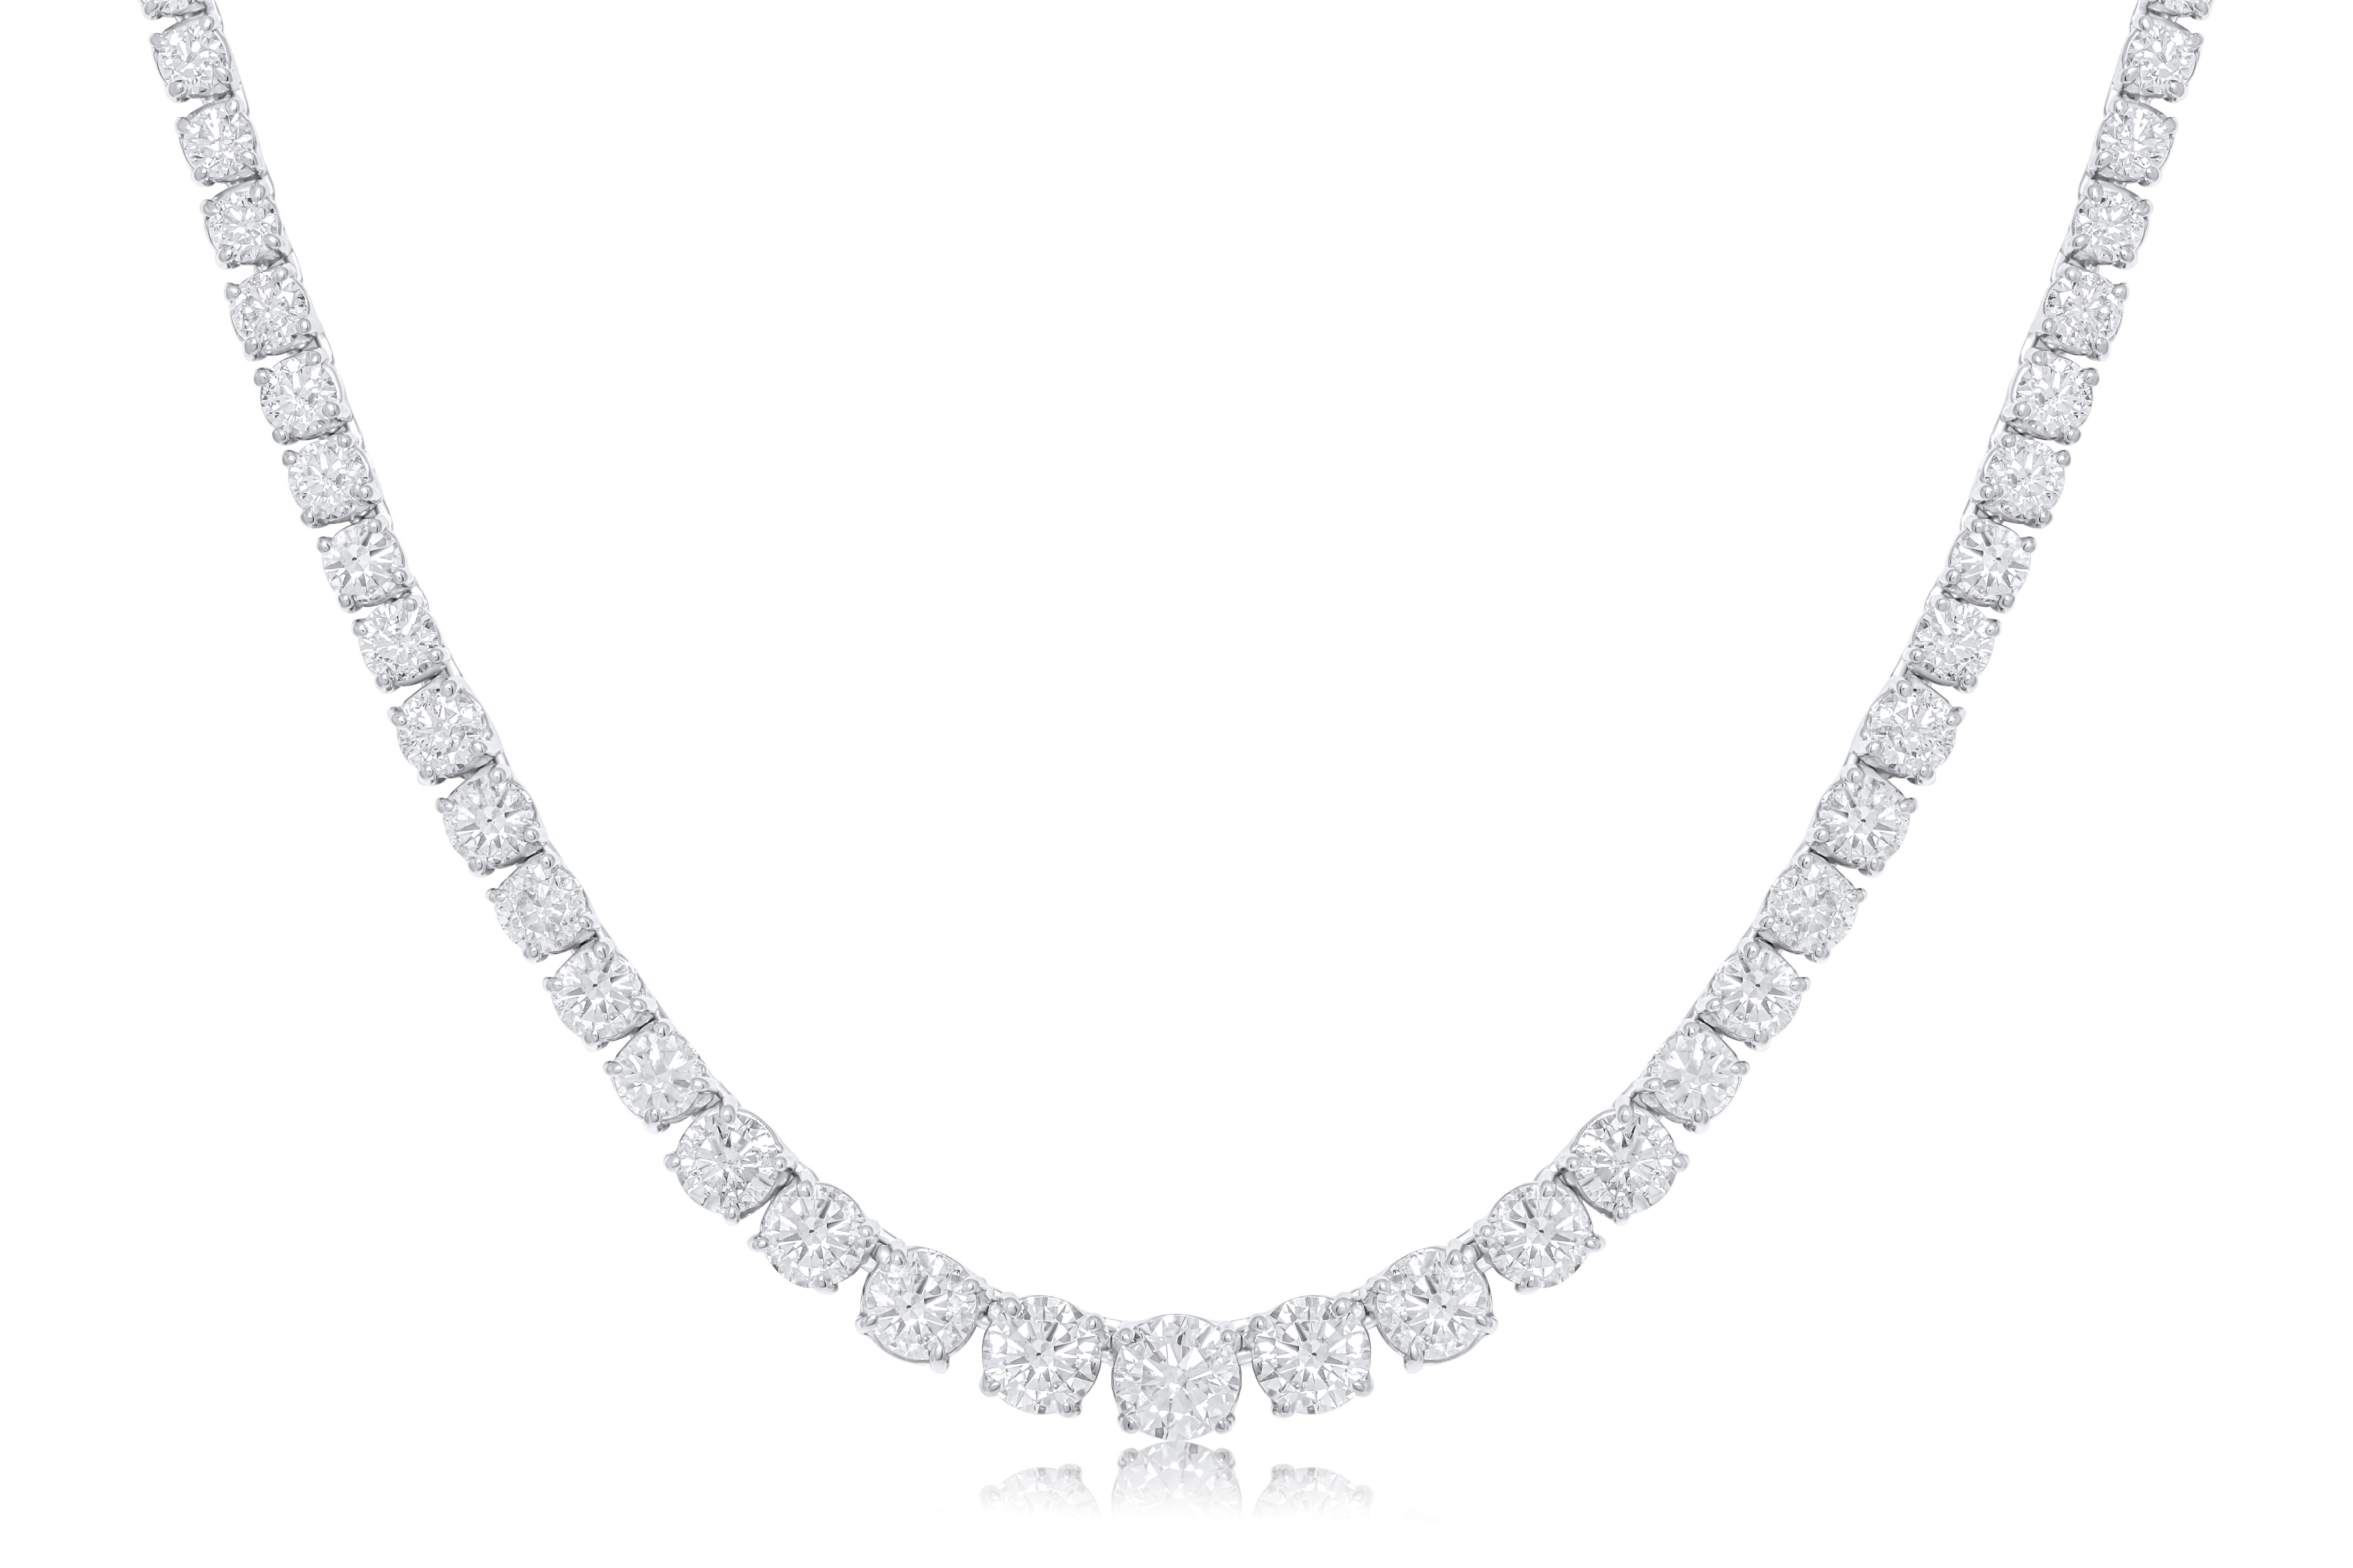 Modern Diana M. Custom 20.05 cts Round 4 Prong Diamond 18k White Gold Tennis Necklace  For Sale